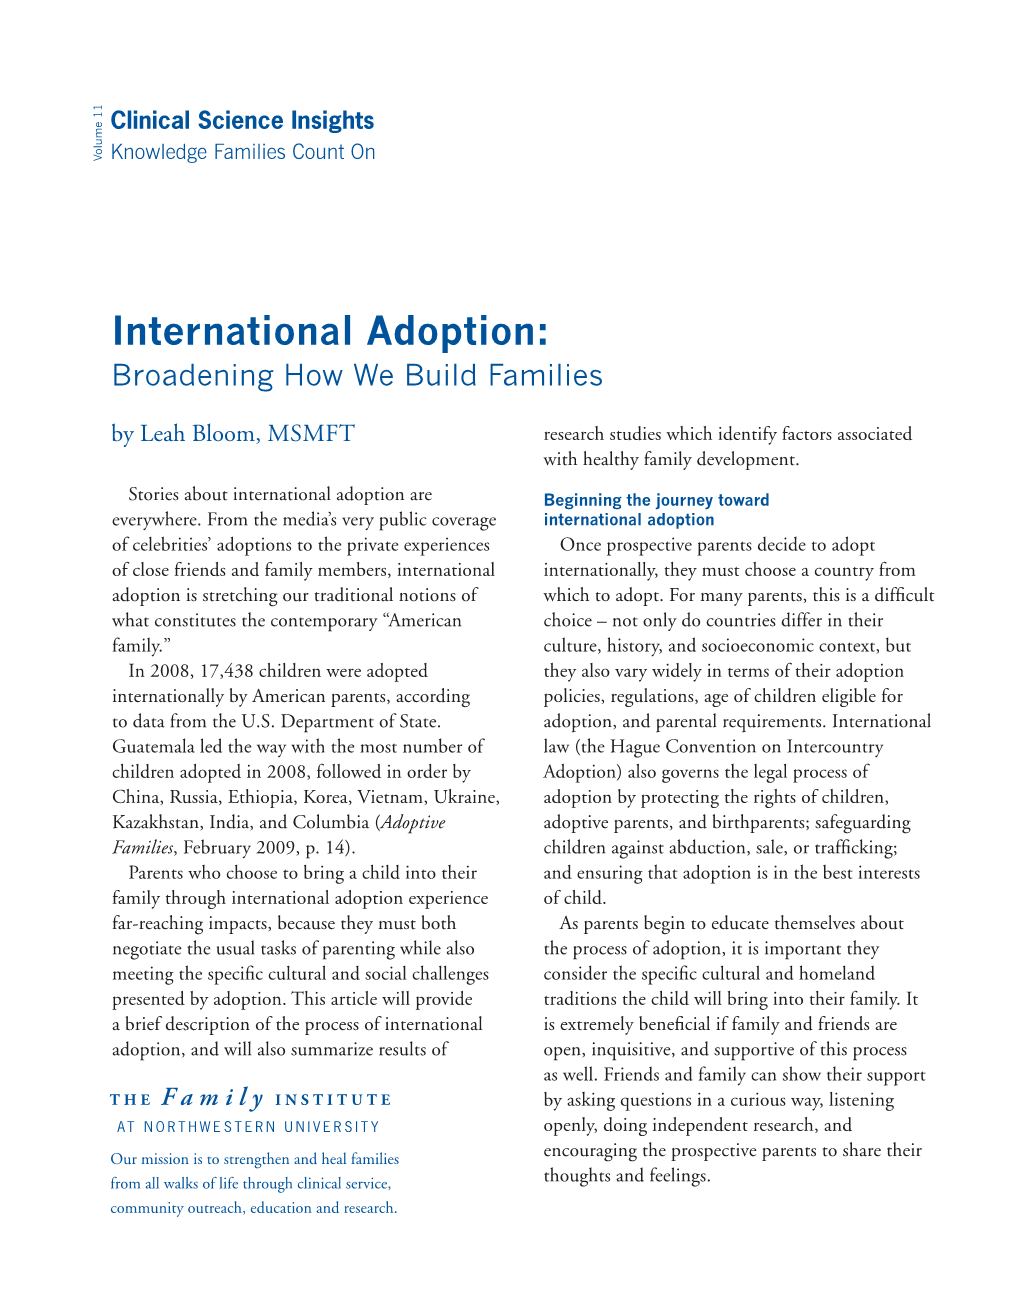 International Adoption: Broadening How We Build Families Clinical Science Insights